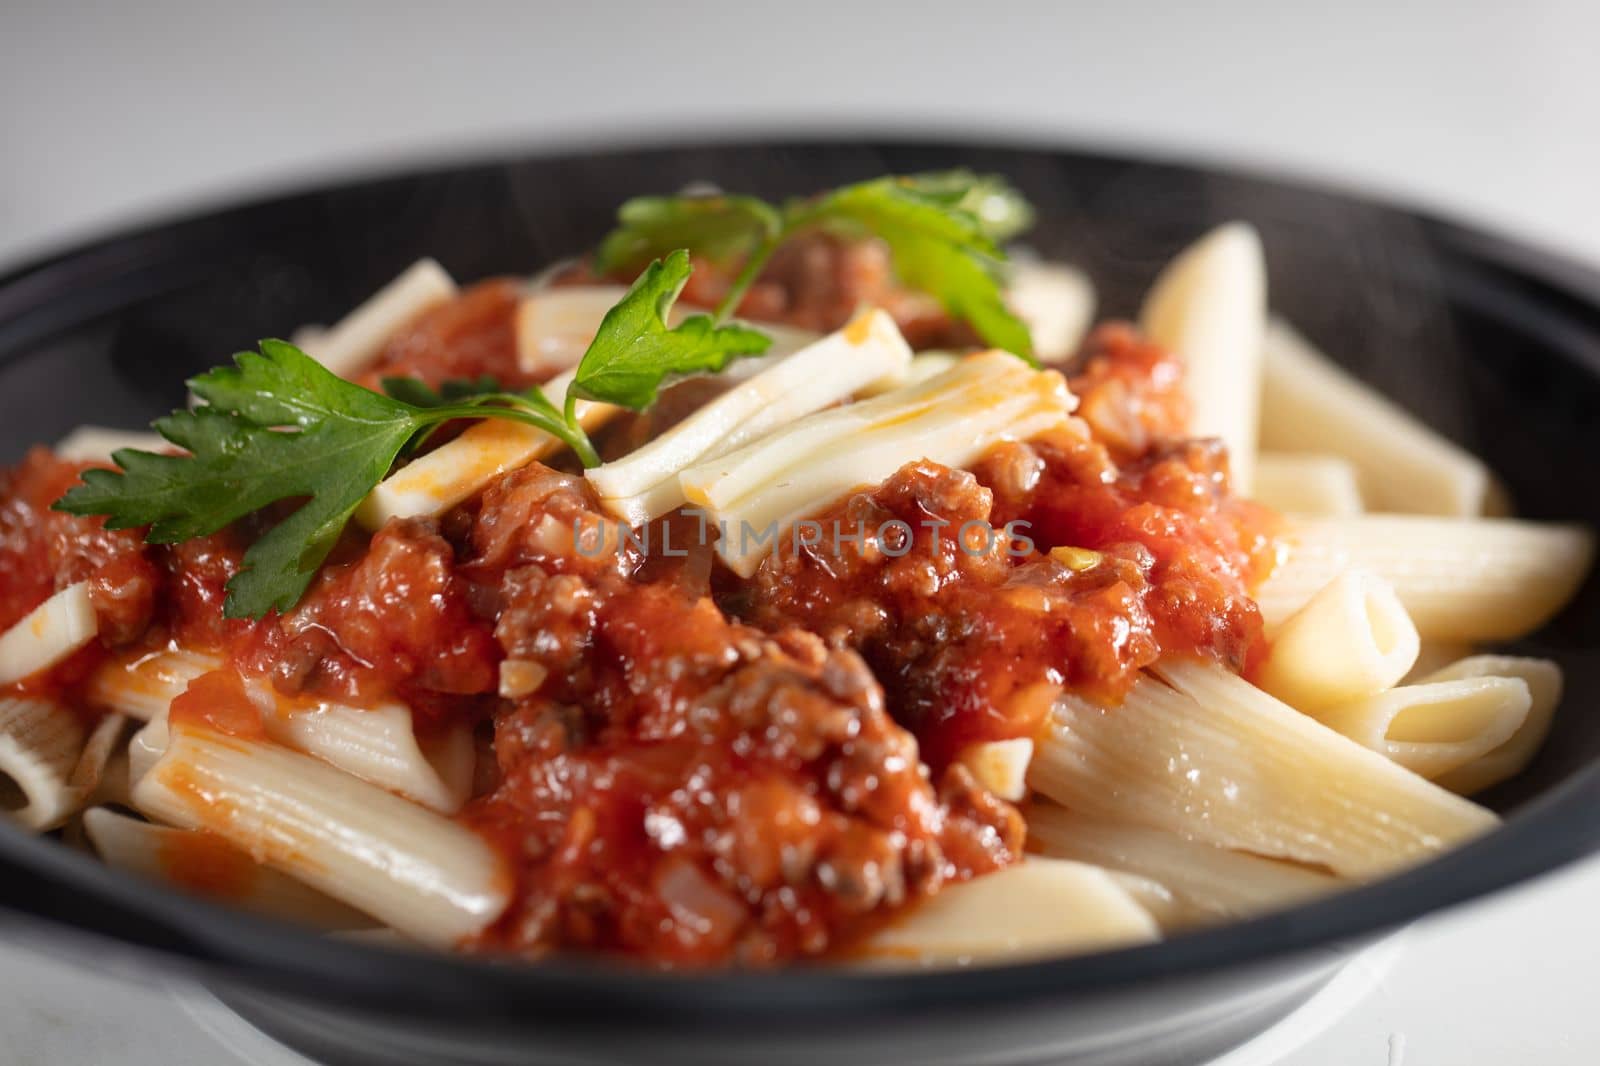 Pasta Penne with Tomato Bolognese Sauce, Parmesan Cheese and Basil. . High quality photo